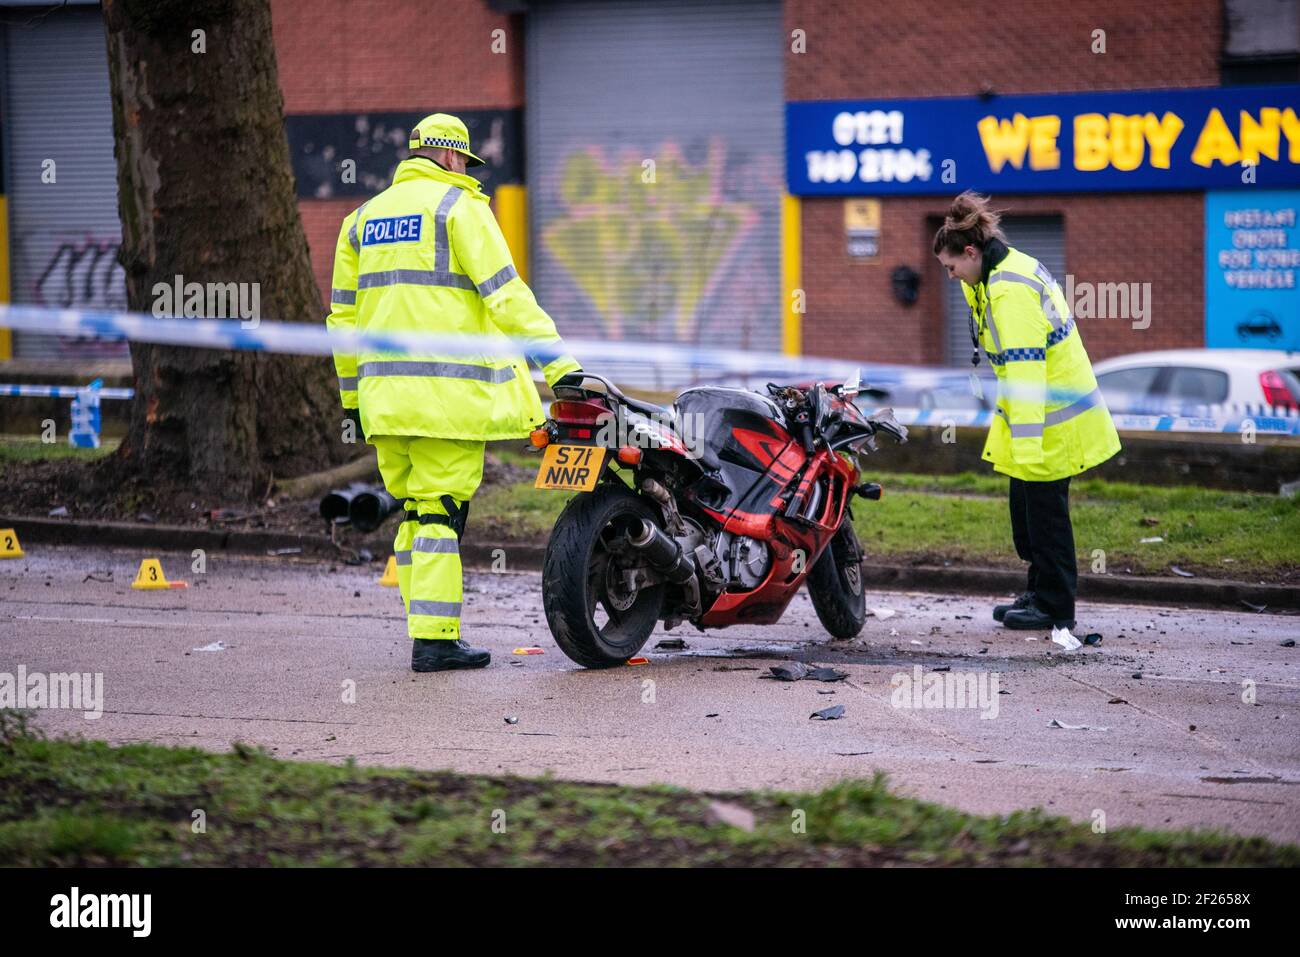 Perry Barr, Birmingham, West Midlands, UK. 10th March 2021: A man in his 50's was seriously injured after his motorbike collided with a tree shortly after midnight on Wednesday. The crash happened on the Aldridge Road section of the A34 heading out of the city towards Great Barr. Specialist collision investigator units were on scene to conduct an investigation before the bike was recovered, and the road reopened. Police are appealing for Dash Cam footage. Credit: Ryan Underwood / Alamy Live News Stock Photo